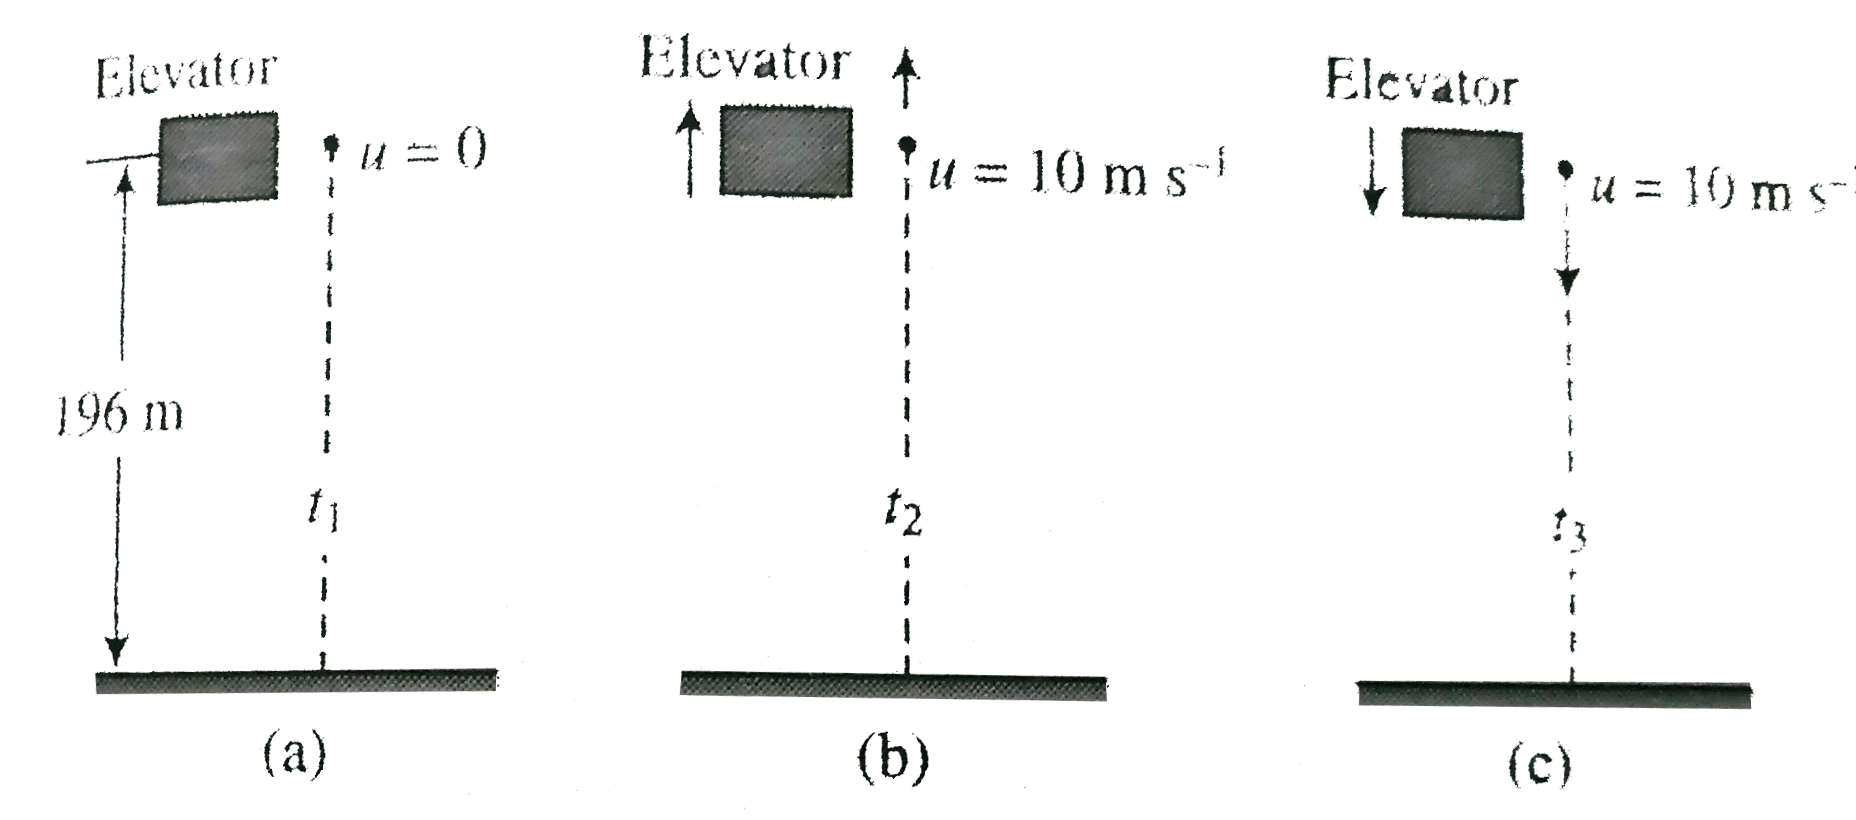 A ball is dropped from an elevator at an altitude of 200 m (Fig.4. 39). How much time will the ball take to reach the ground if the elevatior is   .    a. Stationary?    b. Ascending with velocity 10 m s^(-1)   c. Descending with velocity 10 m s^(-1)?